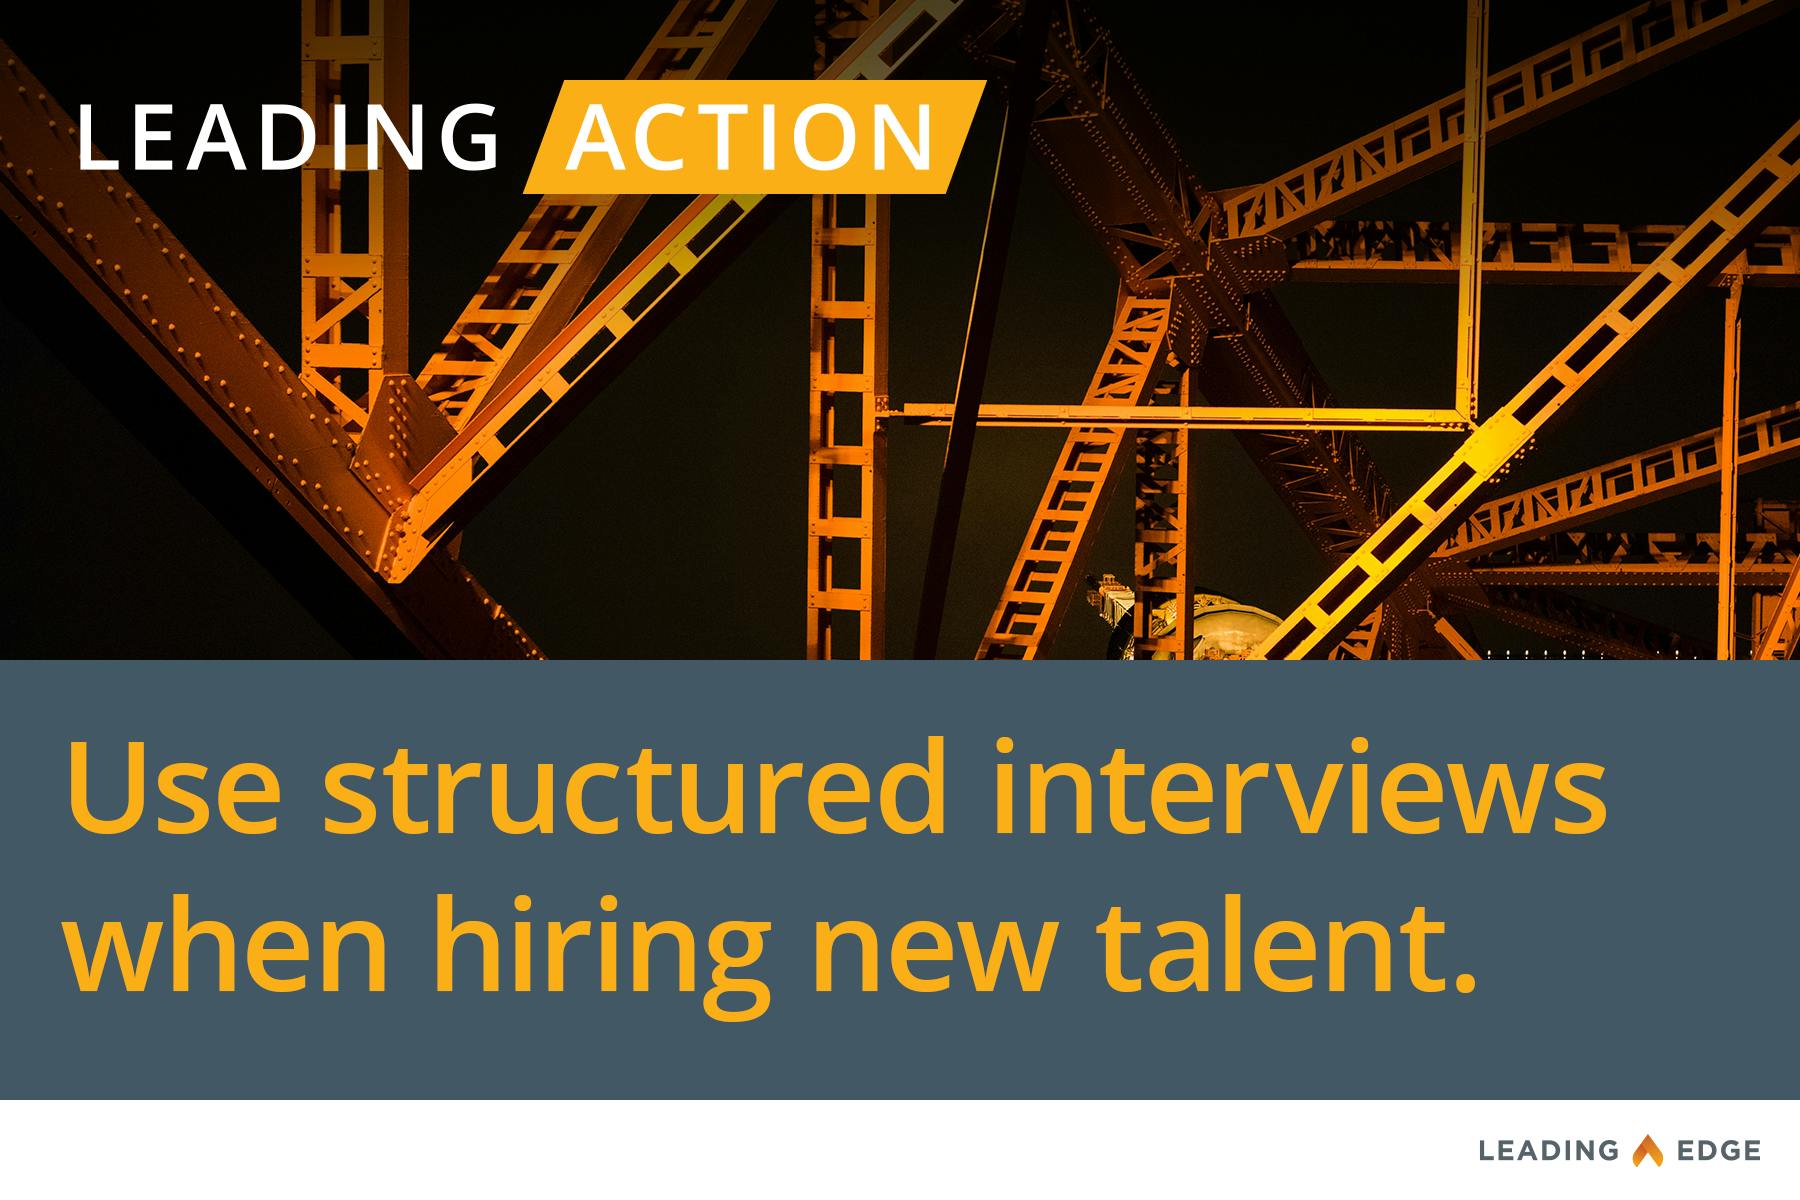 Leading Action: Use structured interviews when hiring new talent.